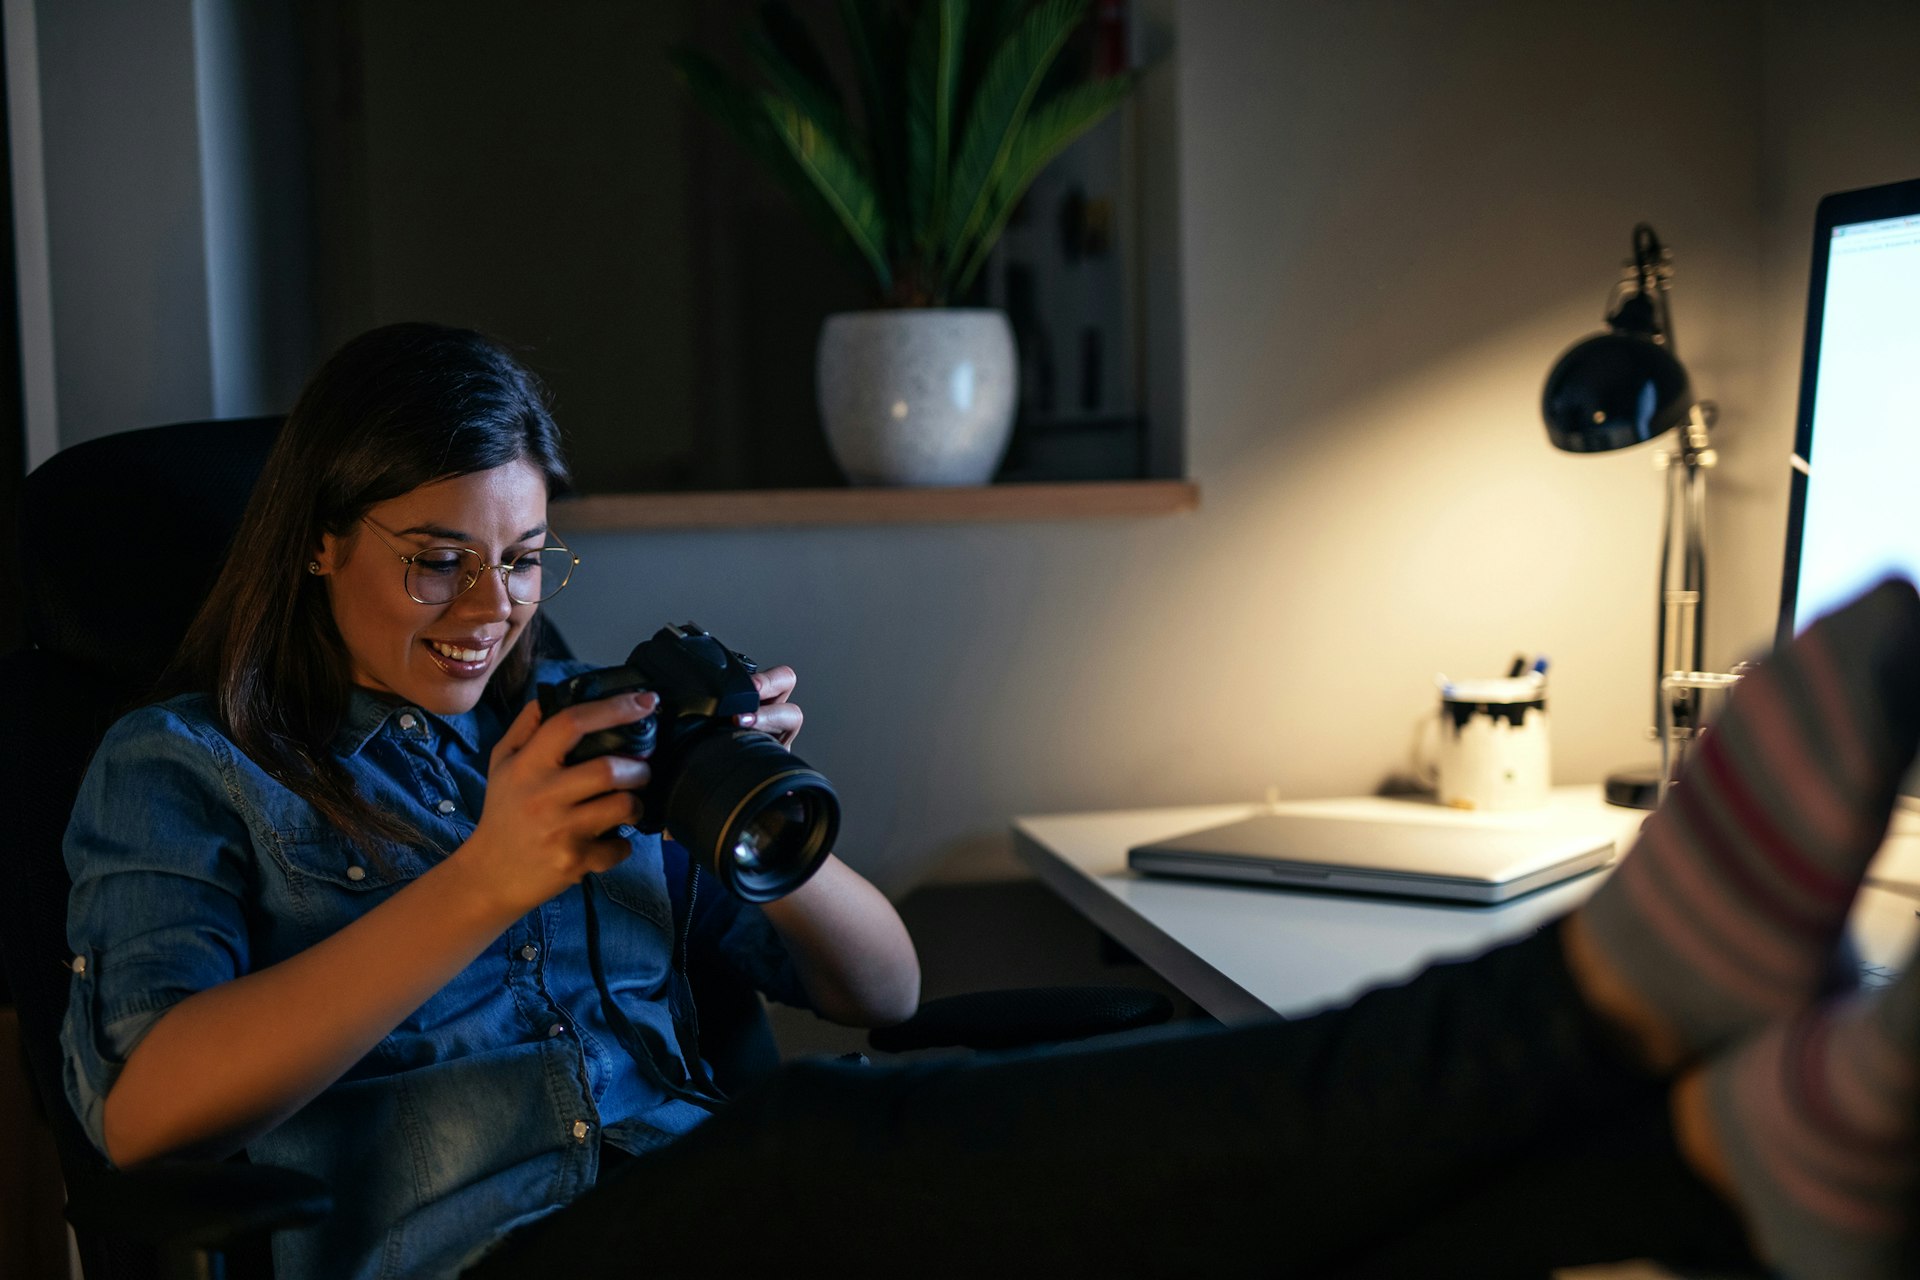 A woman in a blue chambray shirt and round glasses sits with her feet propped up on her desk looking at photos on her camera with a smile